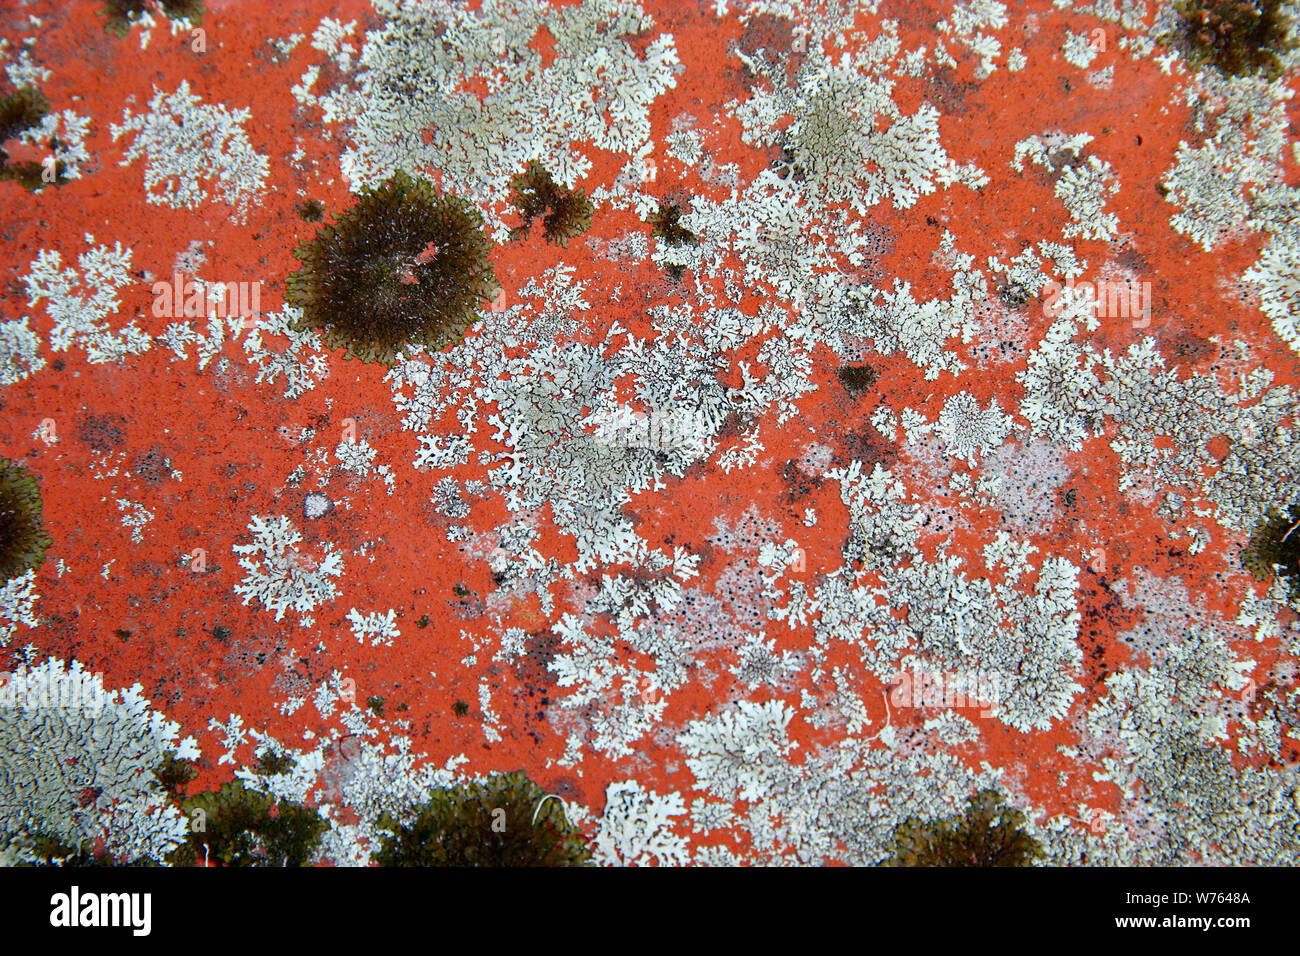 Lichen (Lecanora muralis) growing on a terracotta roof tile. Stock Photo